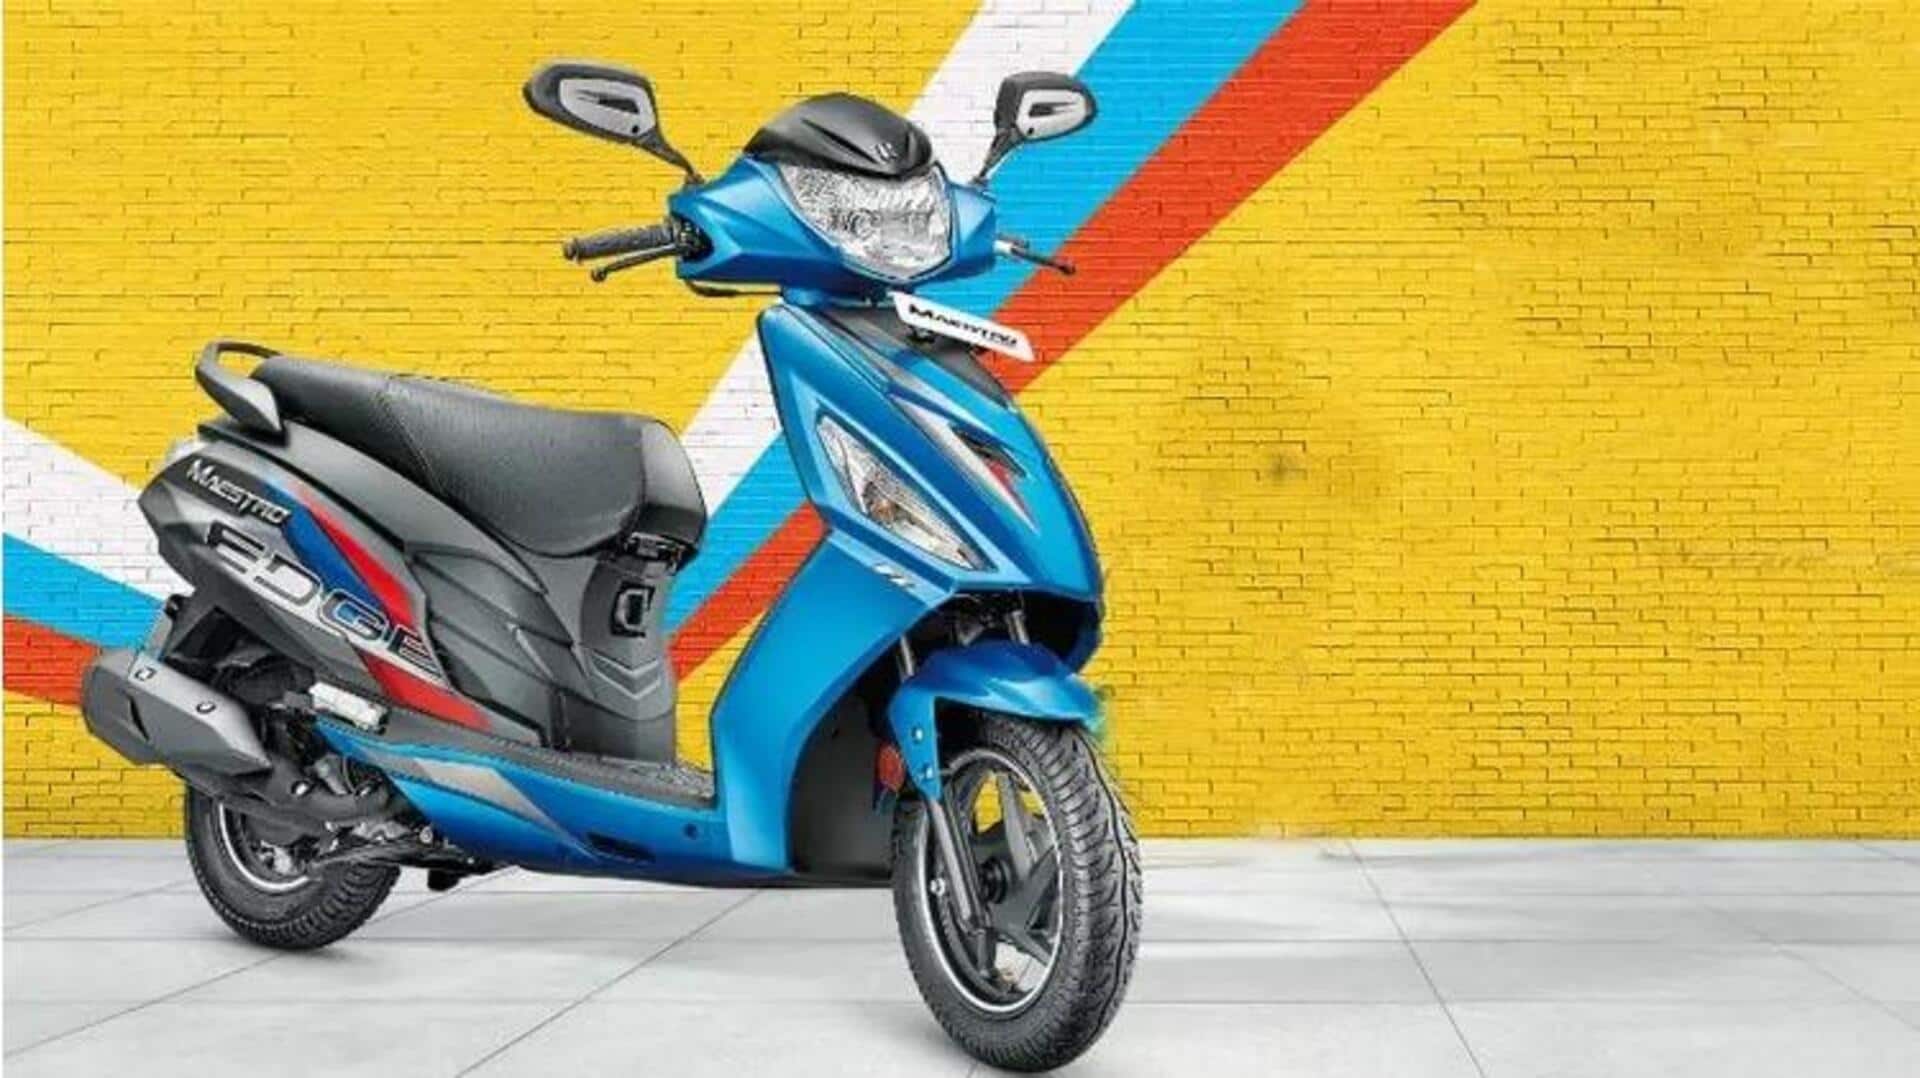 Hero MotoCorp patents Maestro scooter's replacement in India